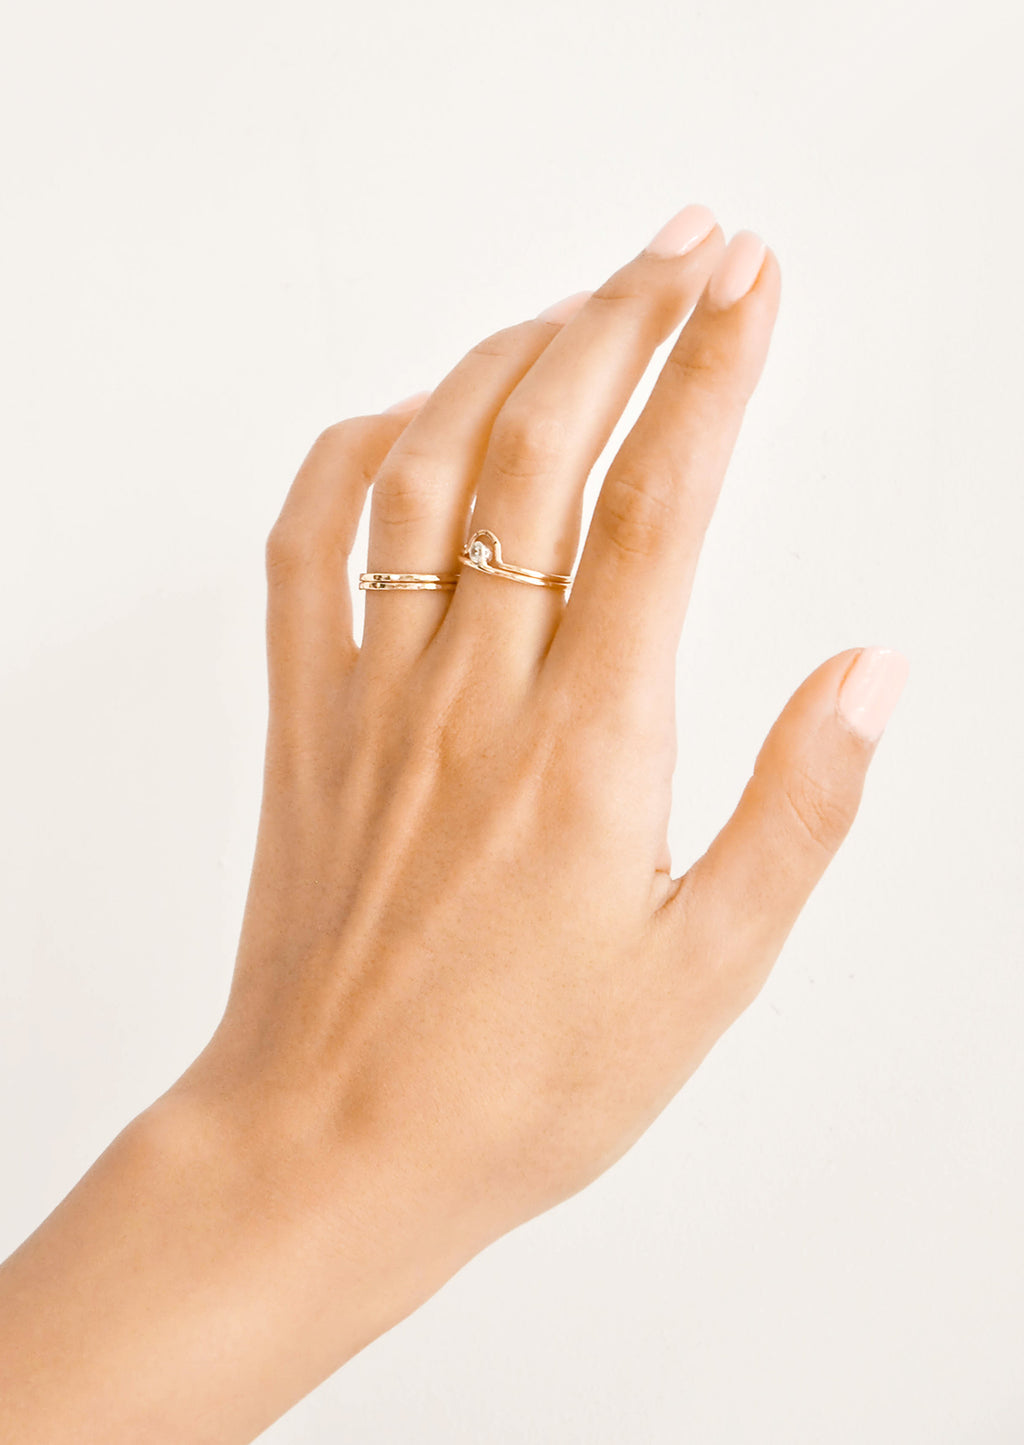 2: Woman's hand with rings on her ring and middle fingers.